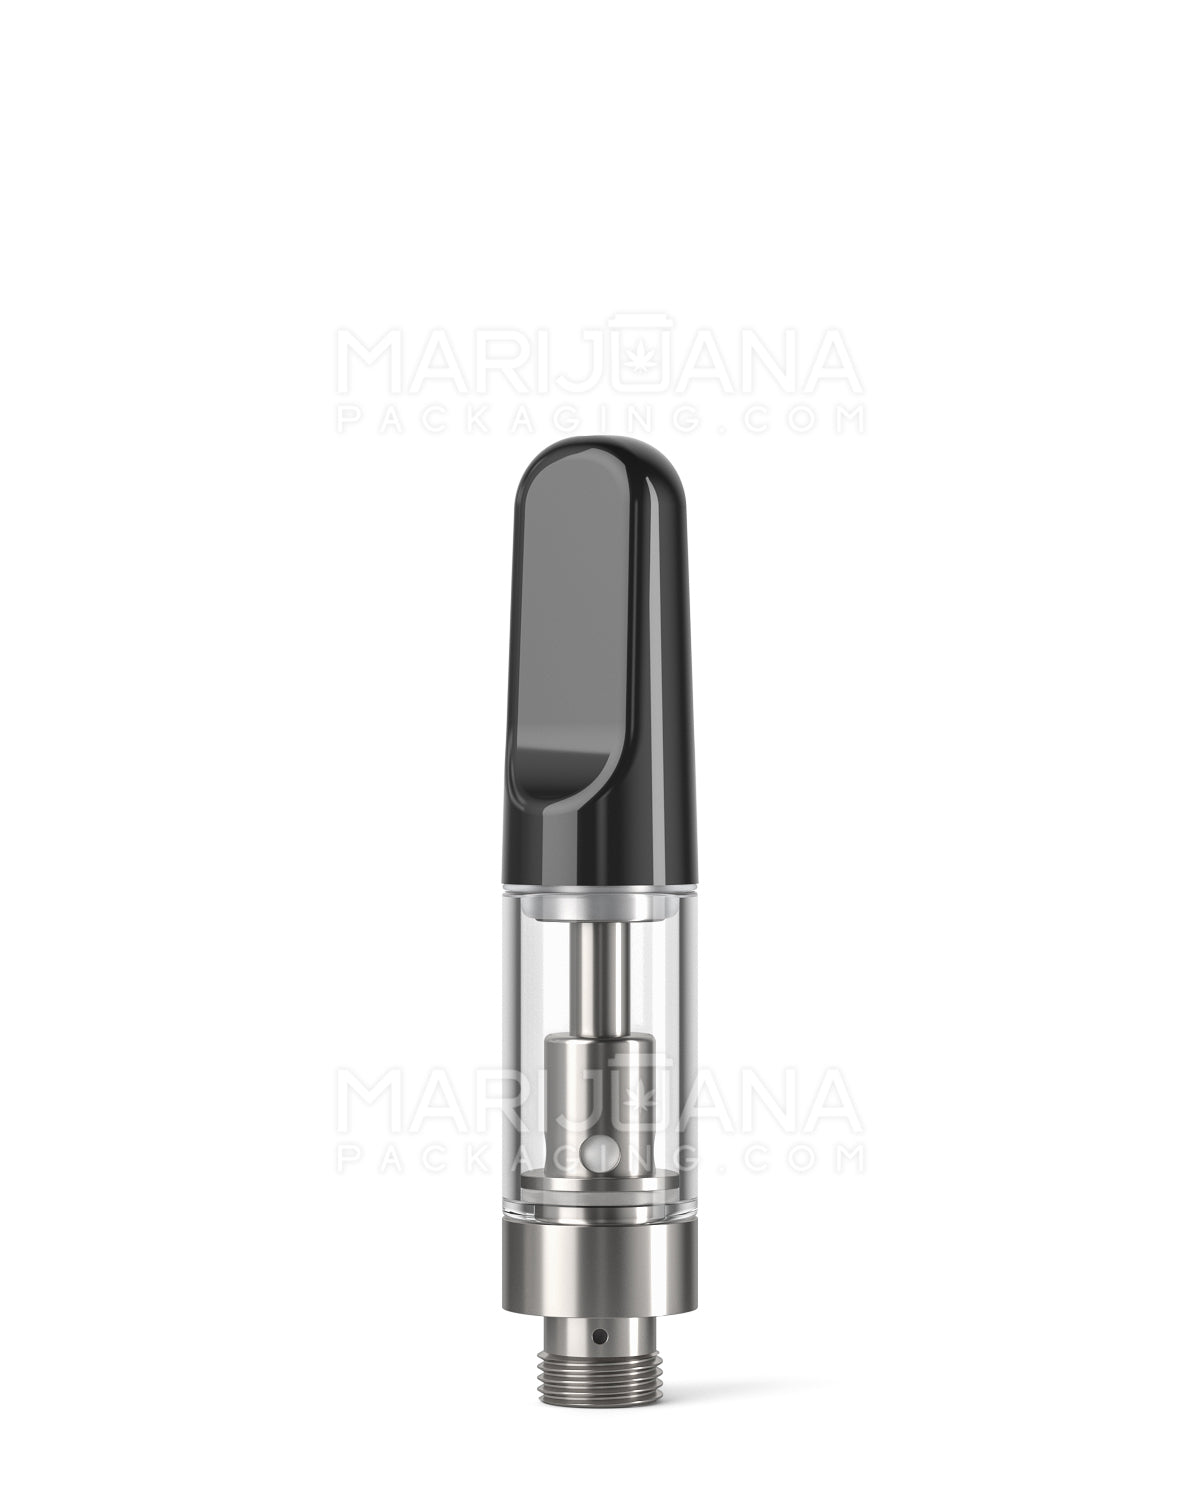 CCELL | Liquid6 Reactor Glass Vape Cartridge with Black Ceramic Mouthpiece | 0.5mL - Screw On - 100 Count - 1